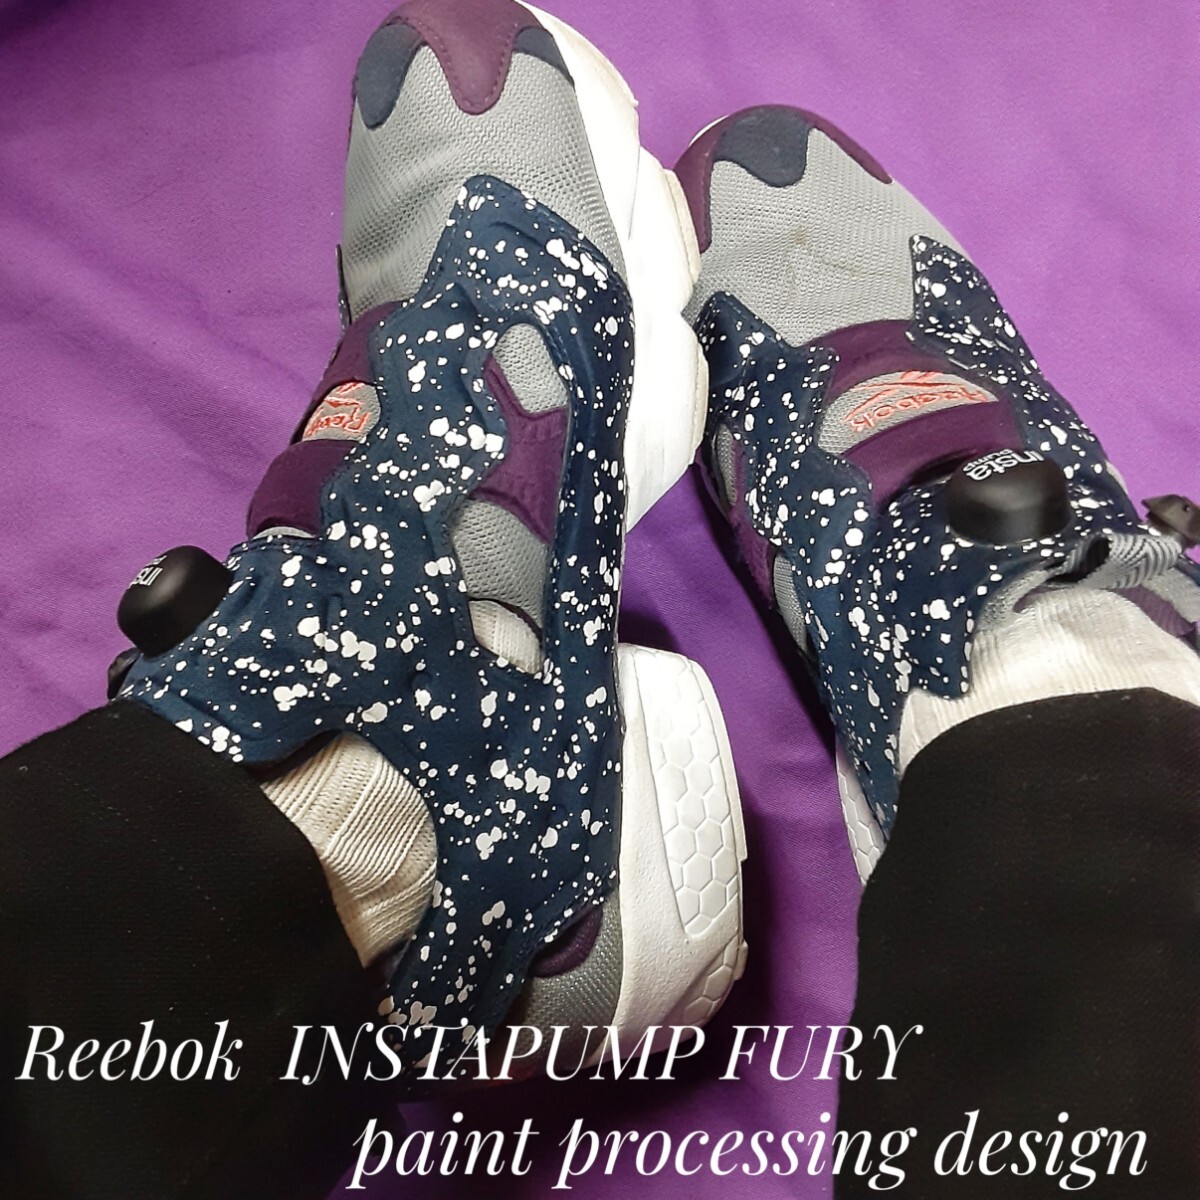  most price!.19580 jpy! limitation specifications ru pack! rare paint processing design! Reebok Insta pump Fury high class thickness bottom sneakers! navy blue purple white grey 26cm